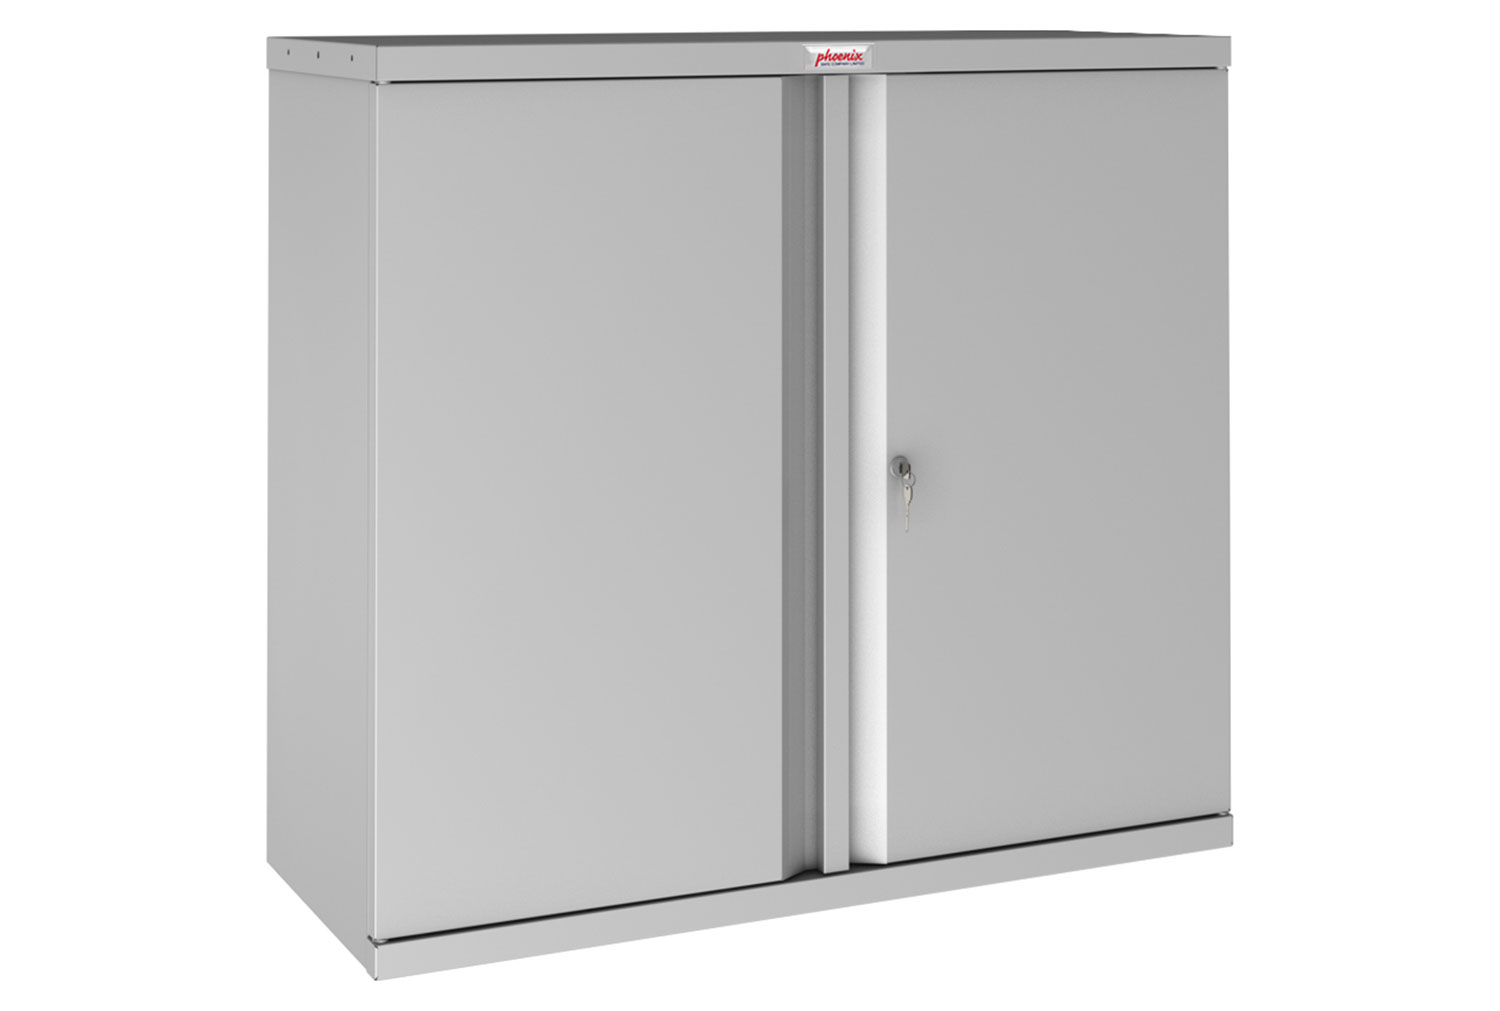 Phoenix SCL Steel Storage Office Cupboards With Key Lock, 1 Shelf - 92wx37dx83h (cm), Grey, Express Delivery